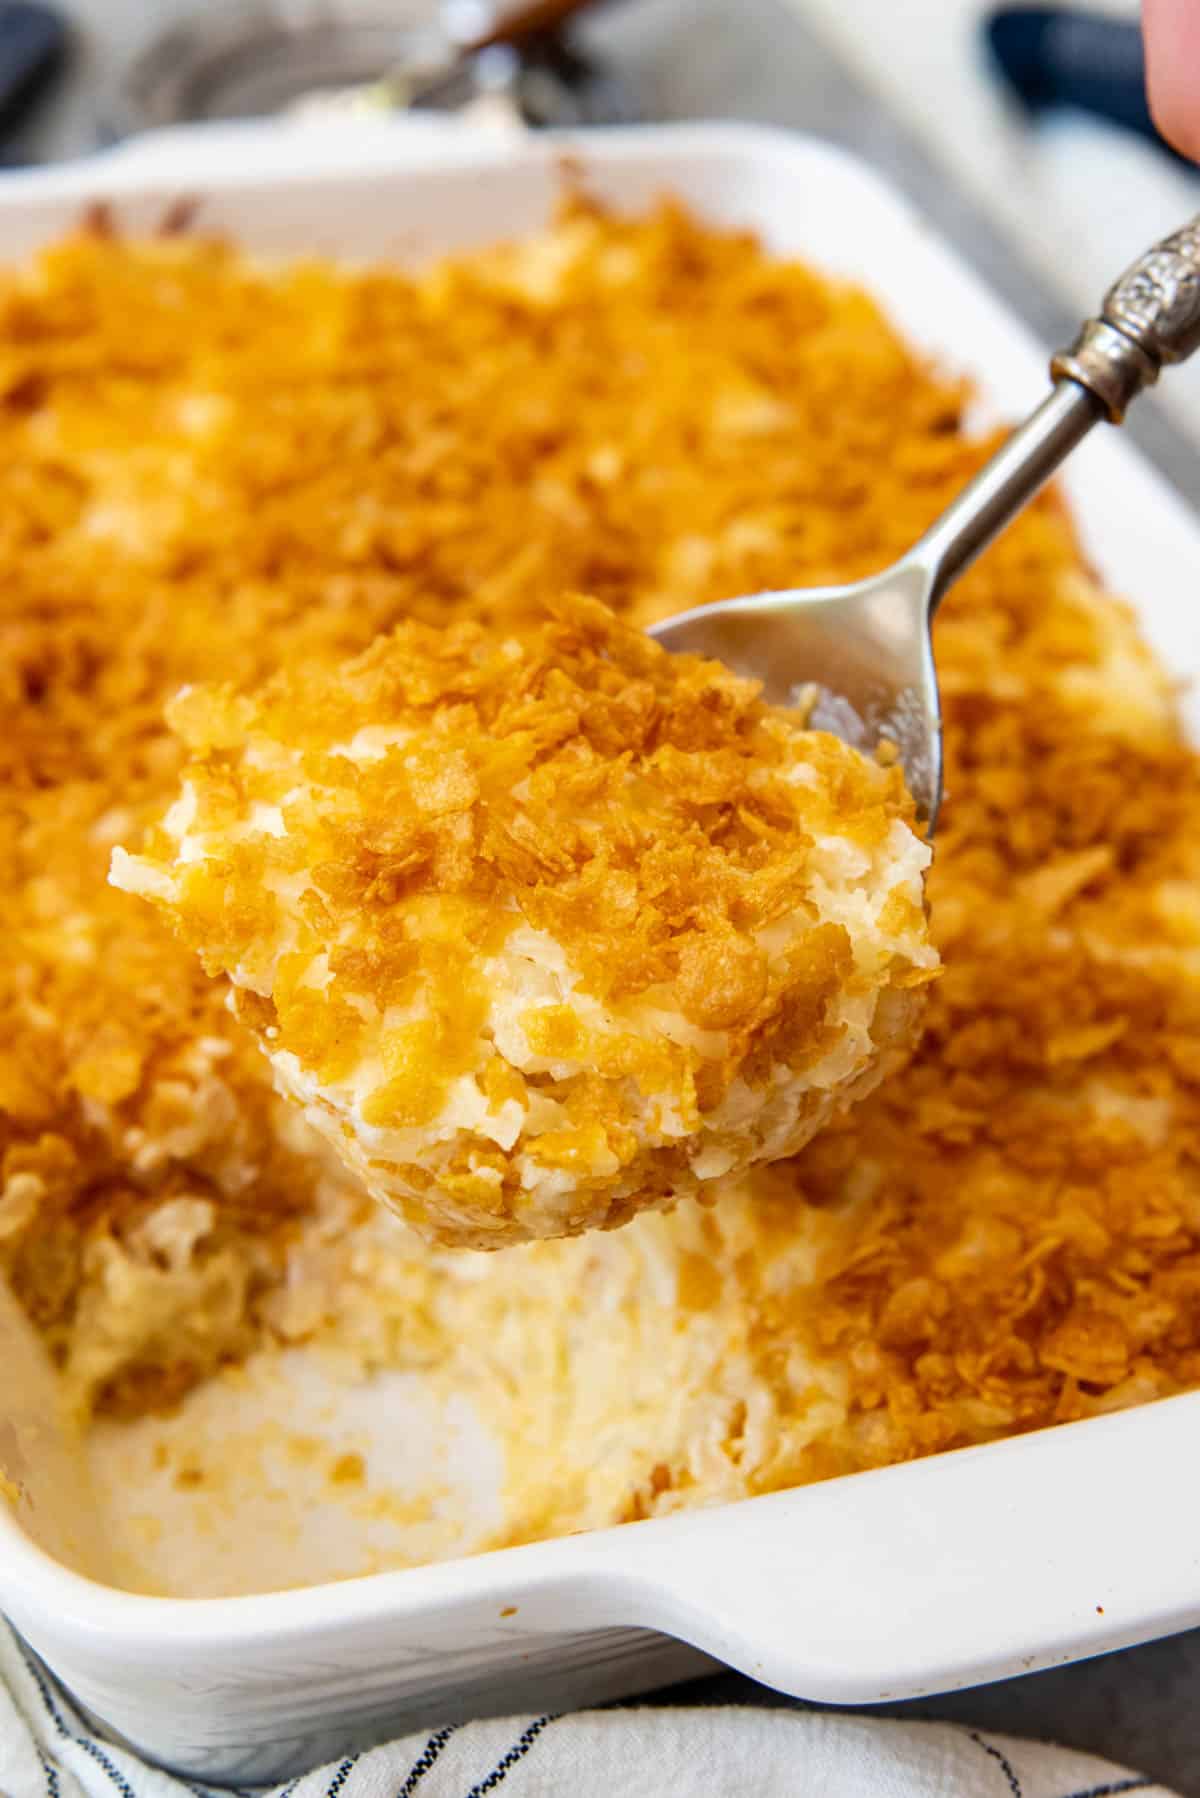 A serving spoon lifting a big scoop of funeral potatoes from the pan.